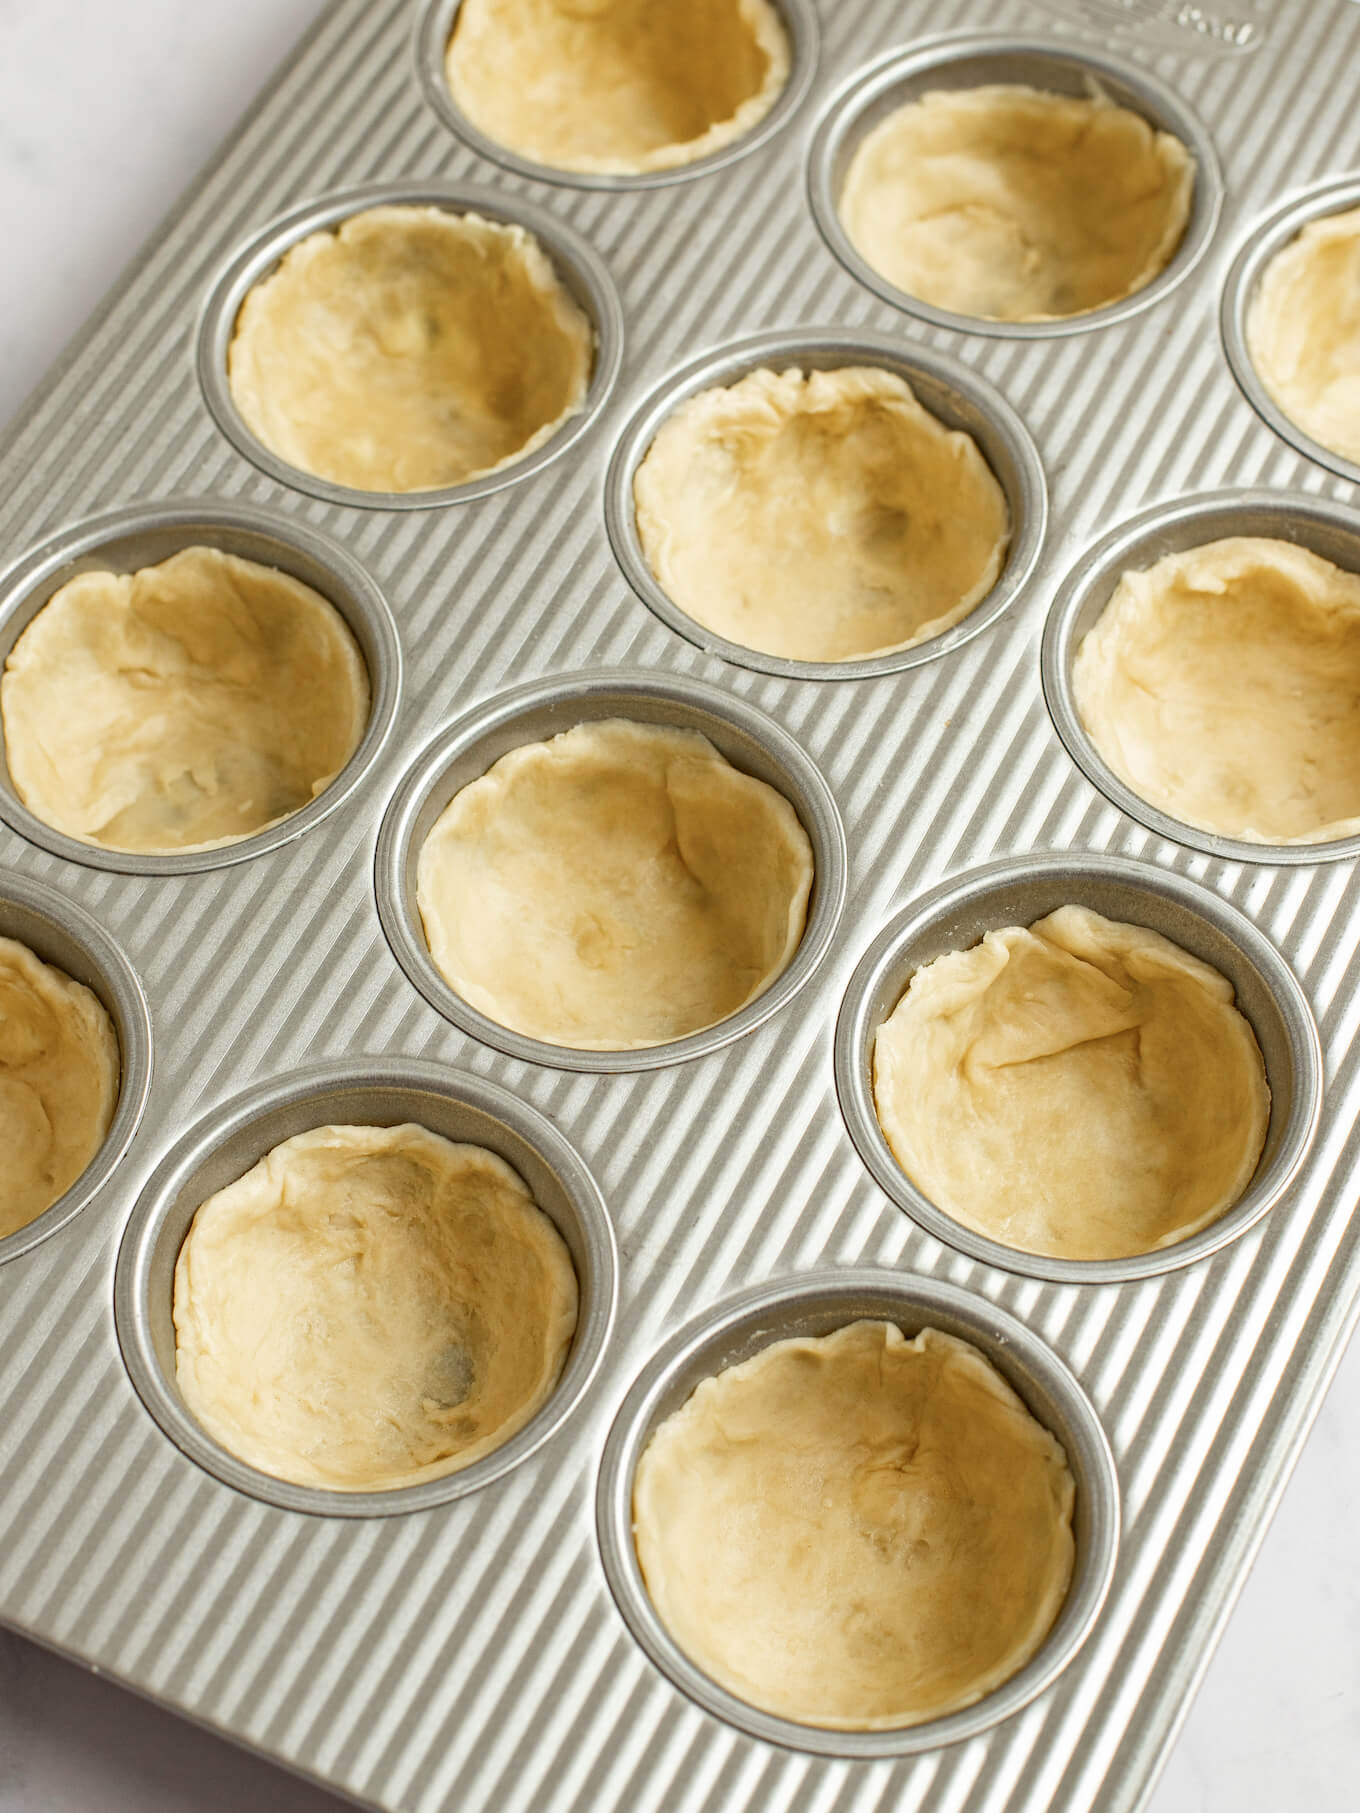 Circular pieces of pie crust pressed into a muffin pan.